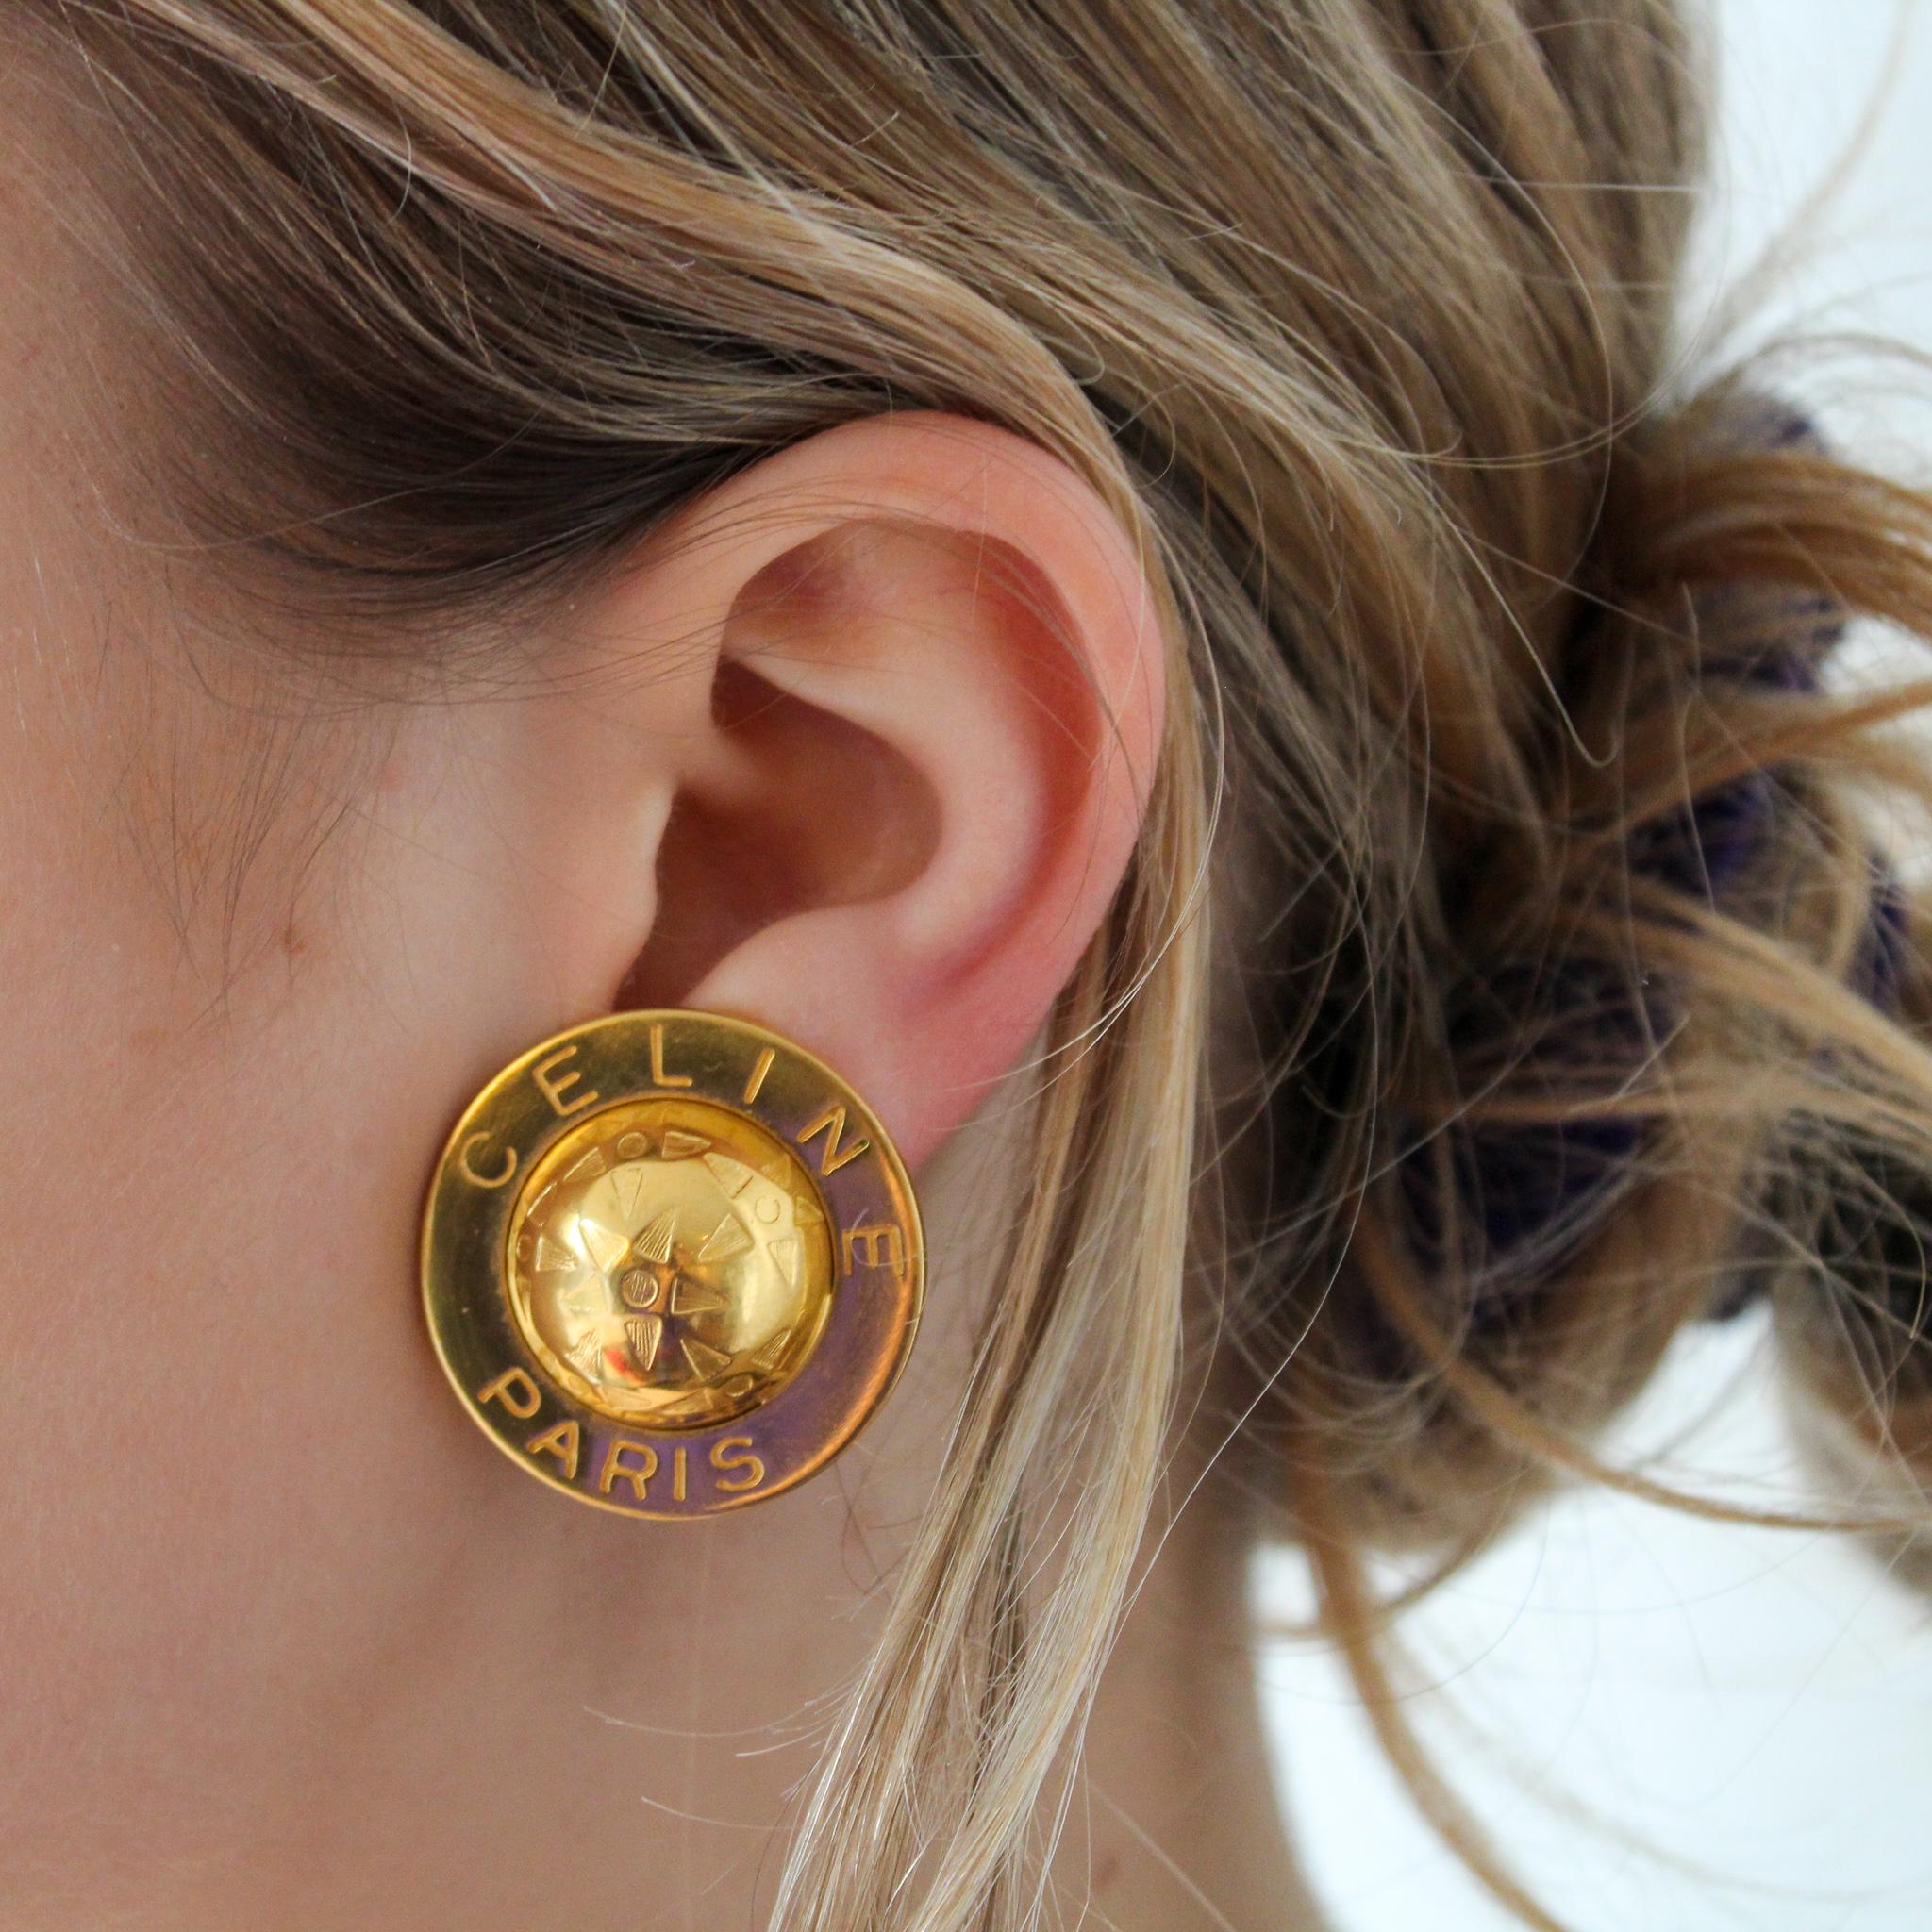 Celine 1980s Vintage Clip On Earrings

Super cool statement vintage earrings with contemporary styling. An iconic design from the late 80s Celine archive. Made in France in 1989 from gold plated metal featuring the iconic globe symbol

Céline was